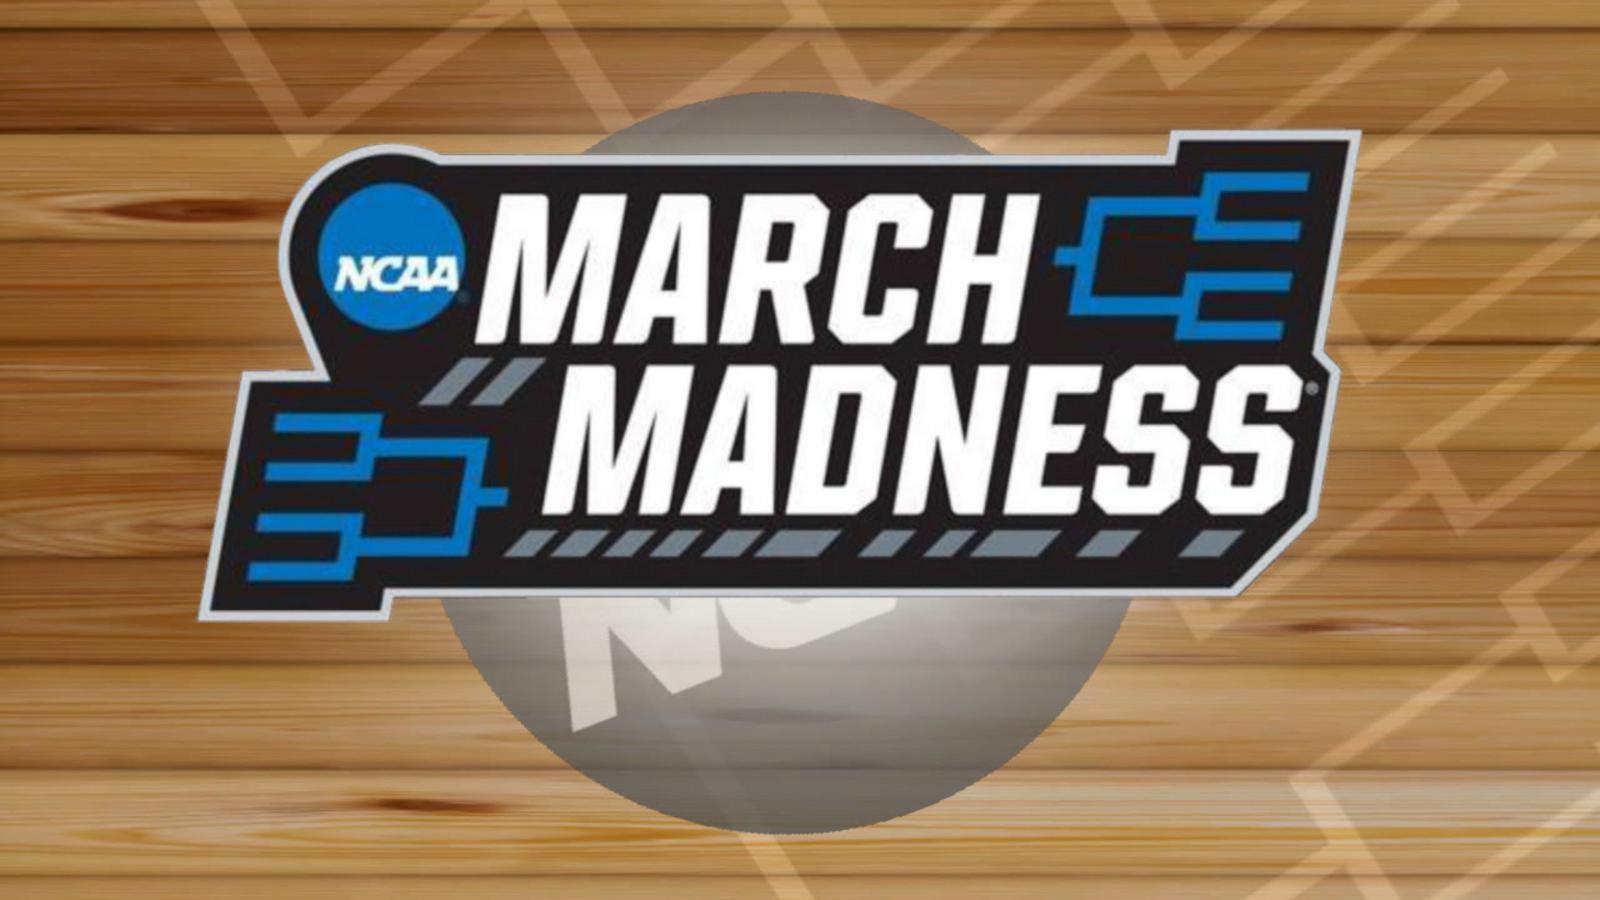 VIDEO: Women’s ‘First Four’ games begin of March Madness